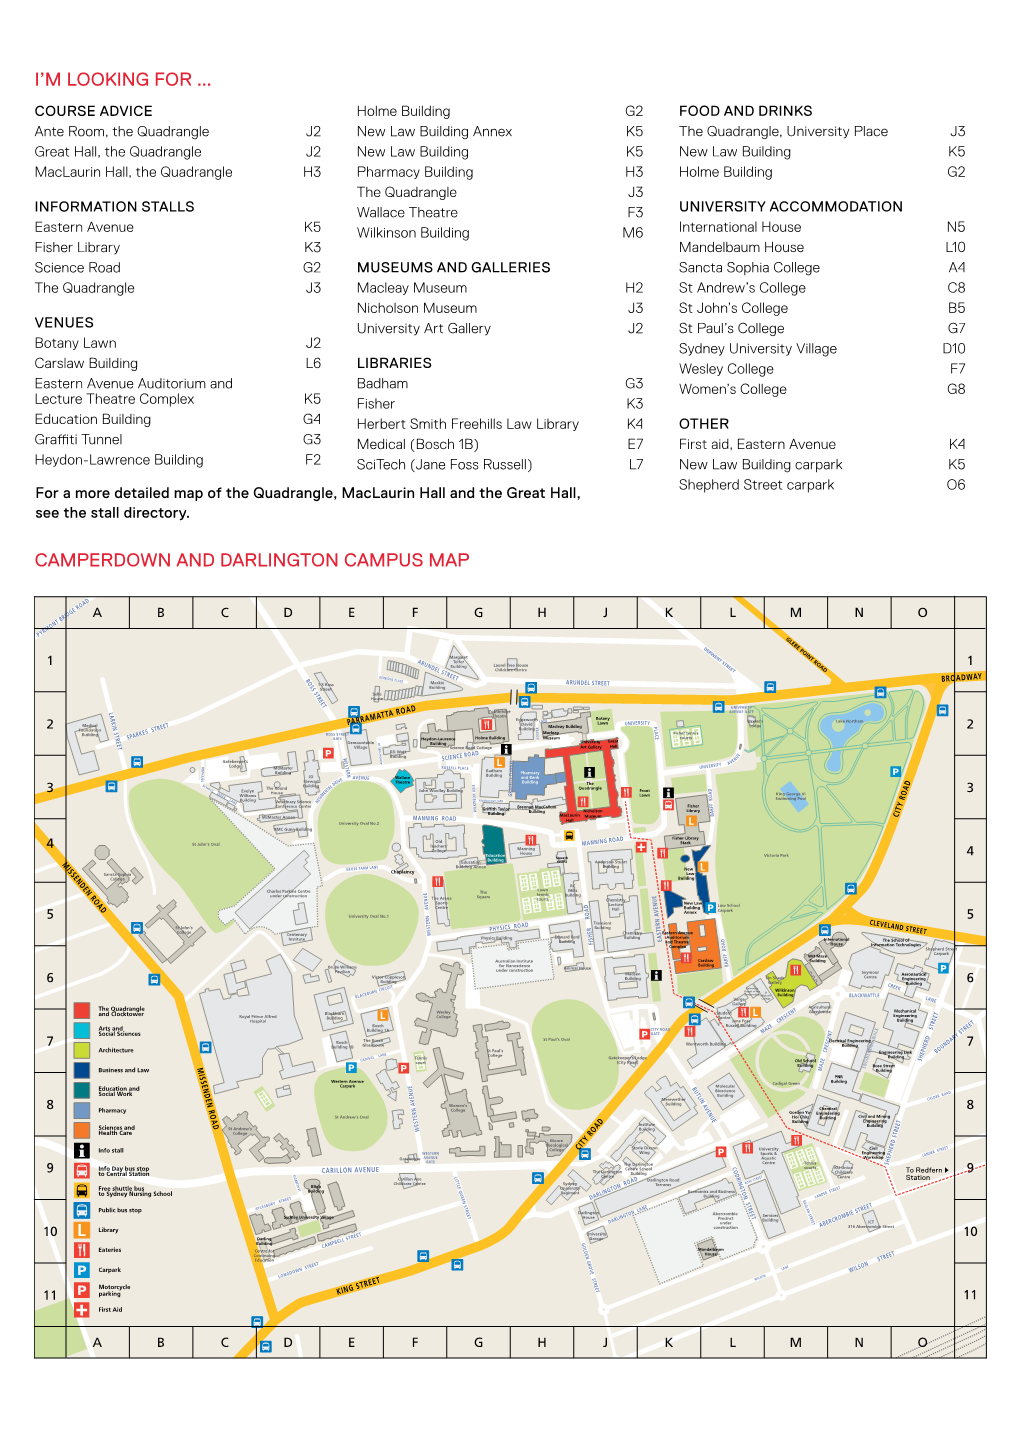 Camperdown and Darlington Campus Map I'm Looking For